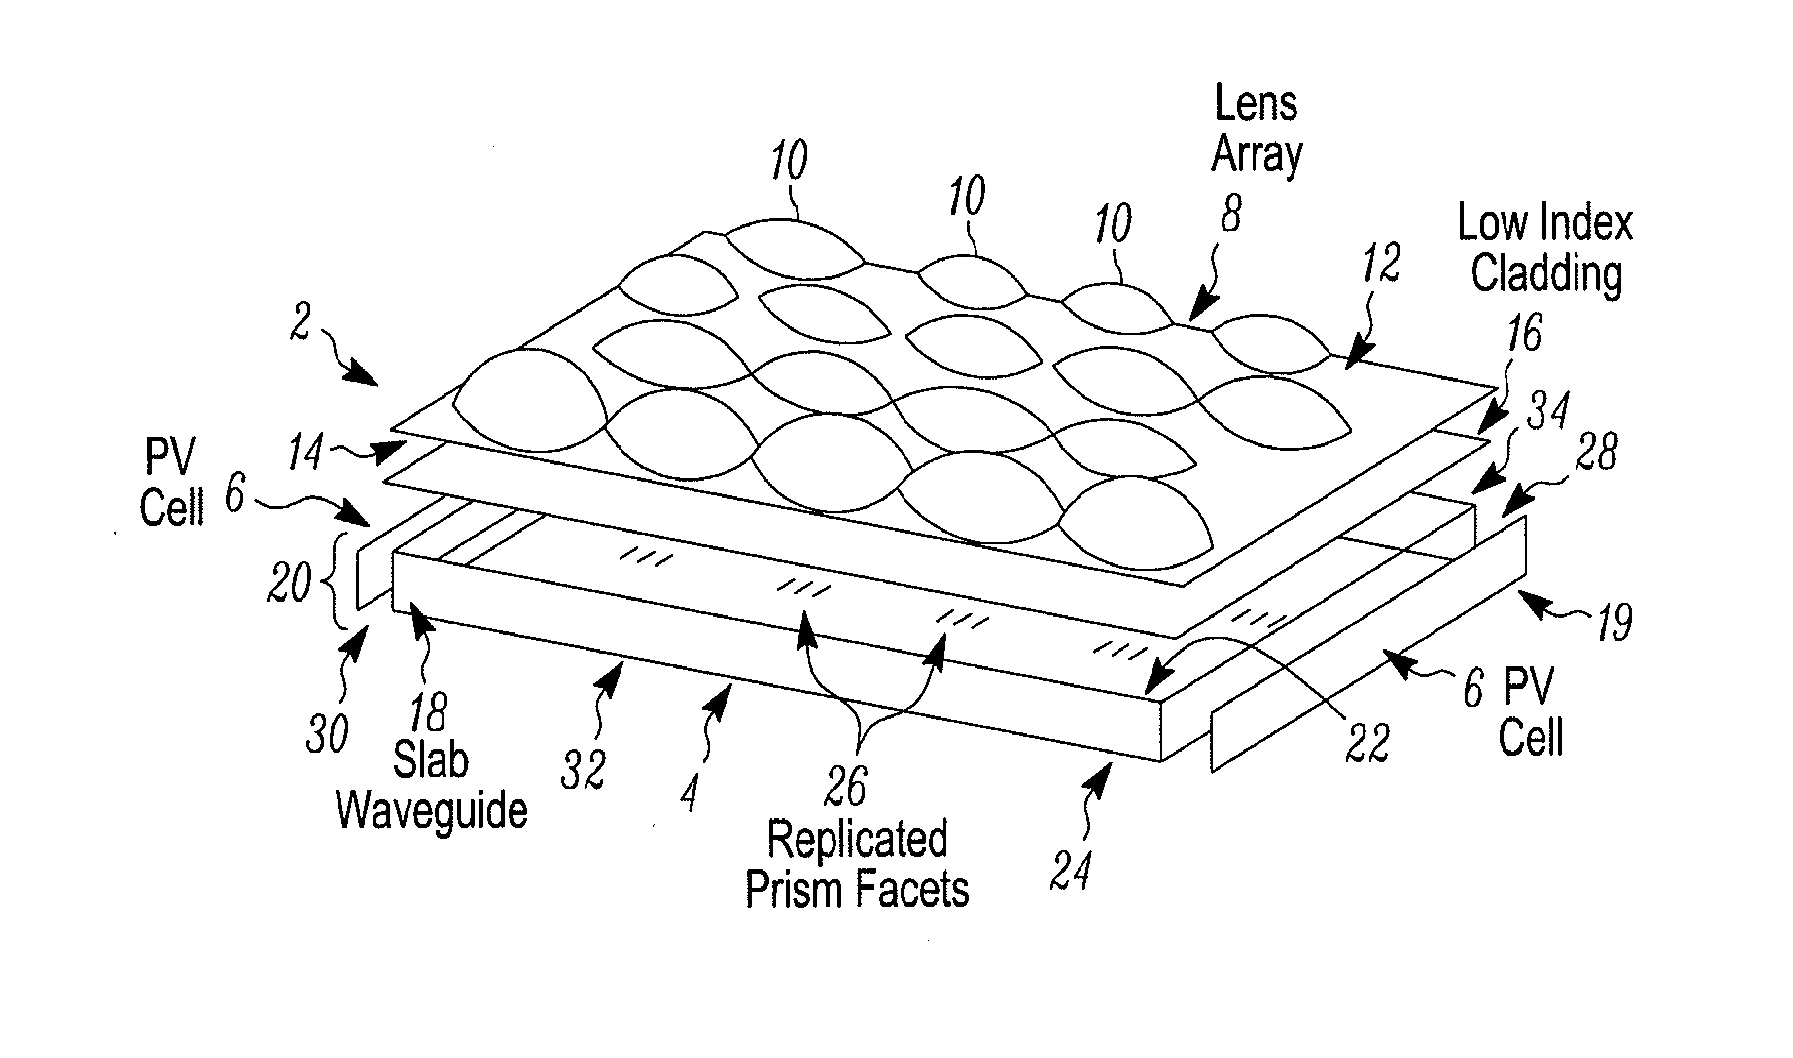 System and method for solar energy capture and related method of manufacturing